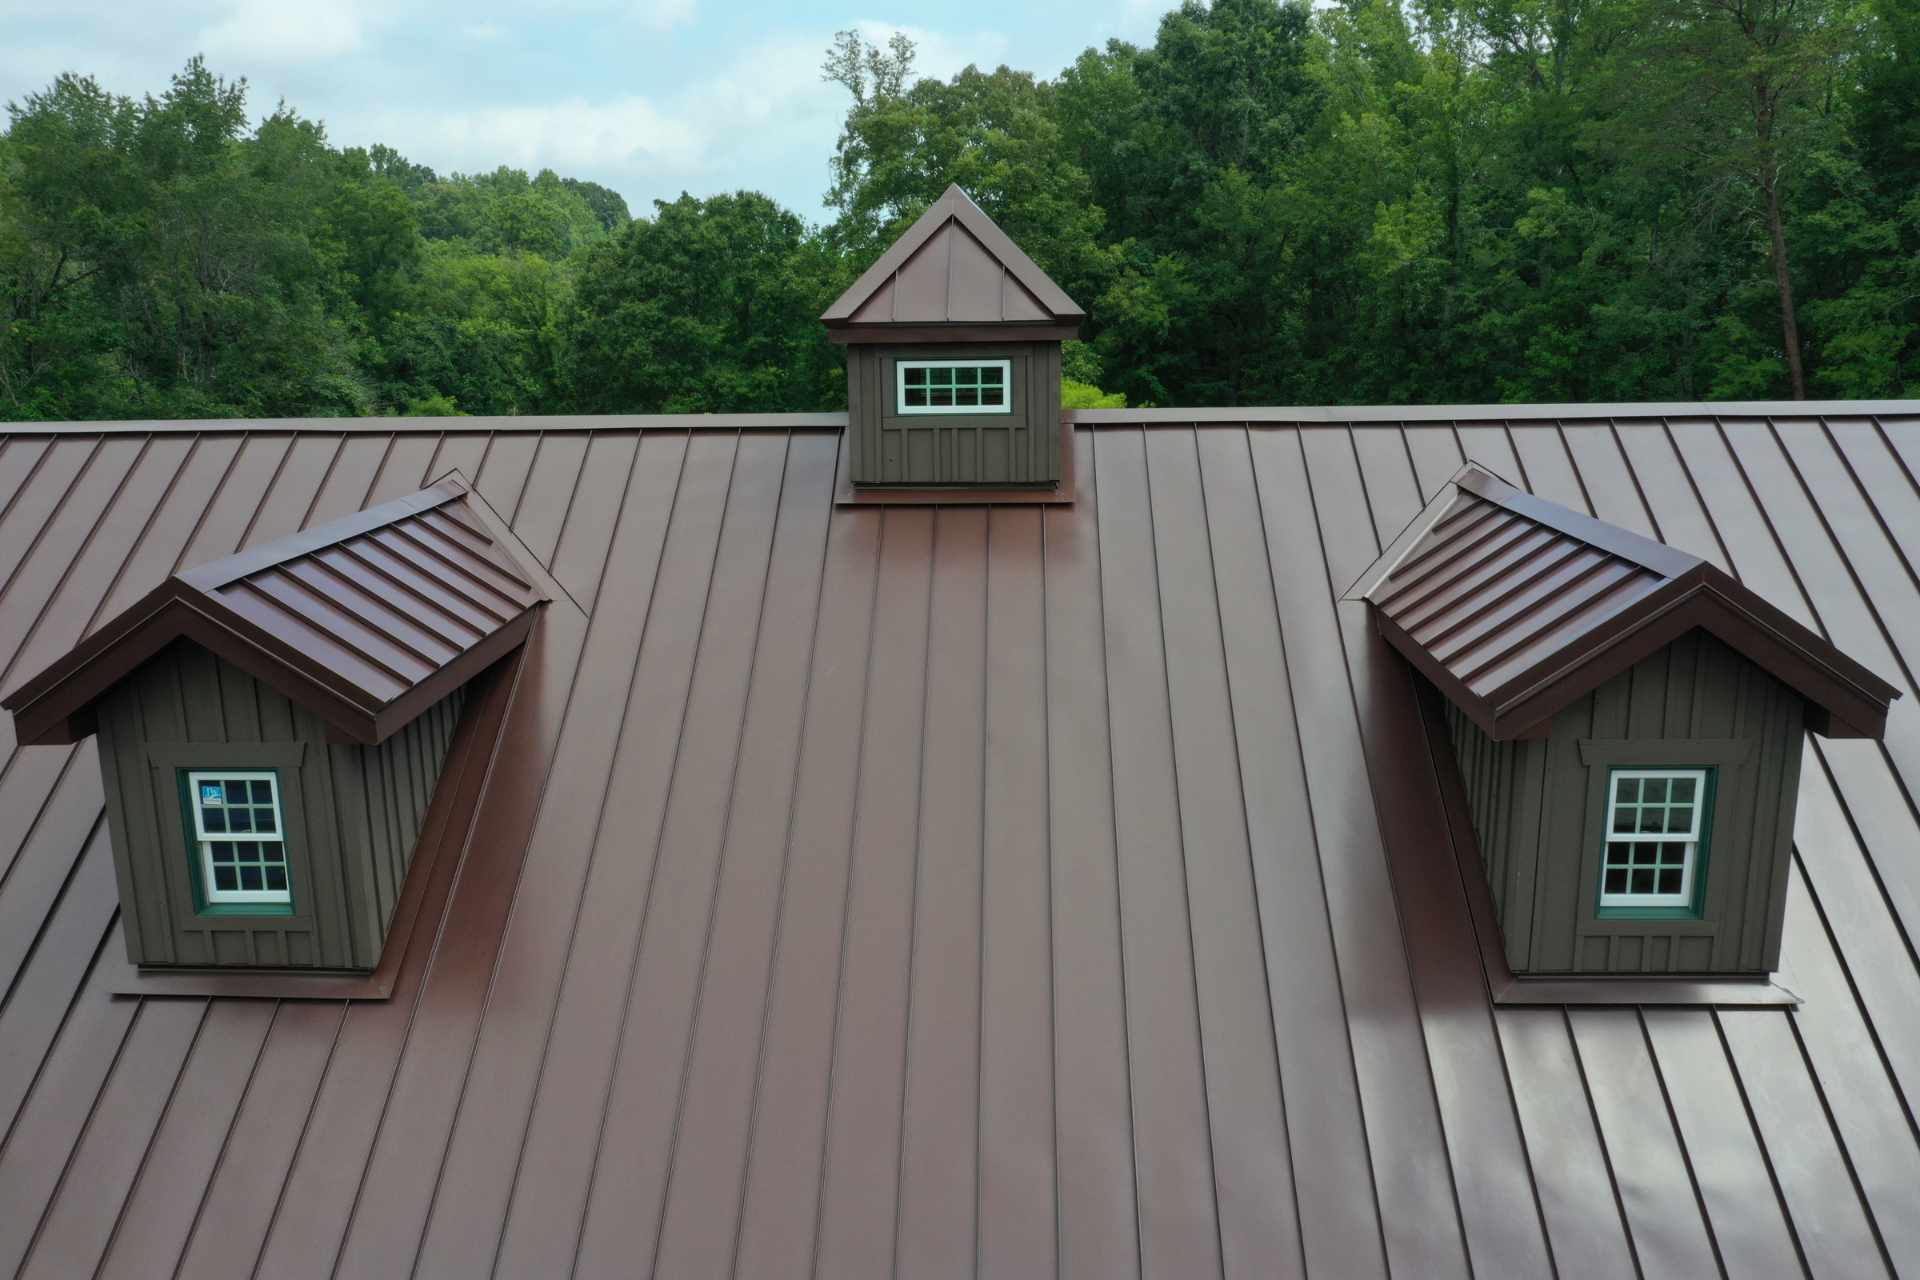 From Rustic to Modern: The Versatility of Metal Roofing for Your Home's Style